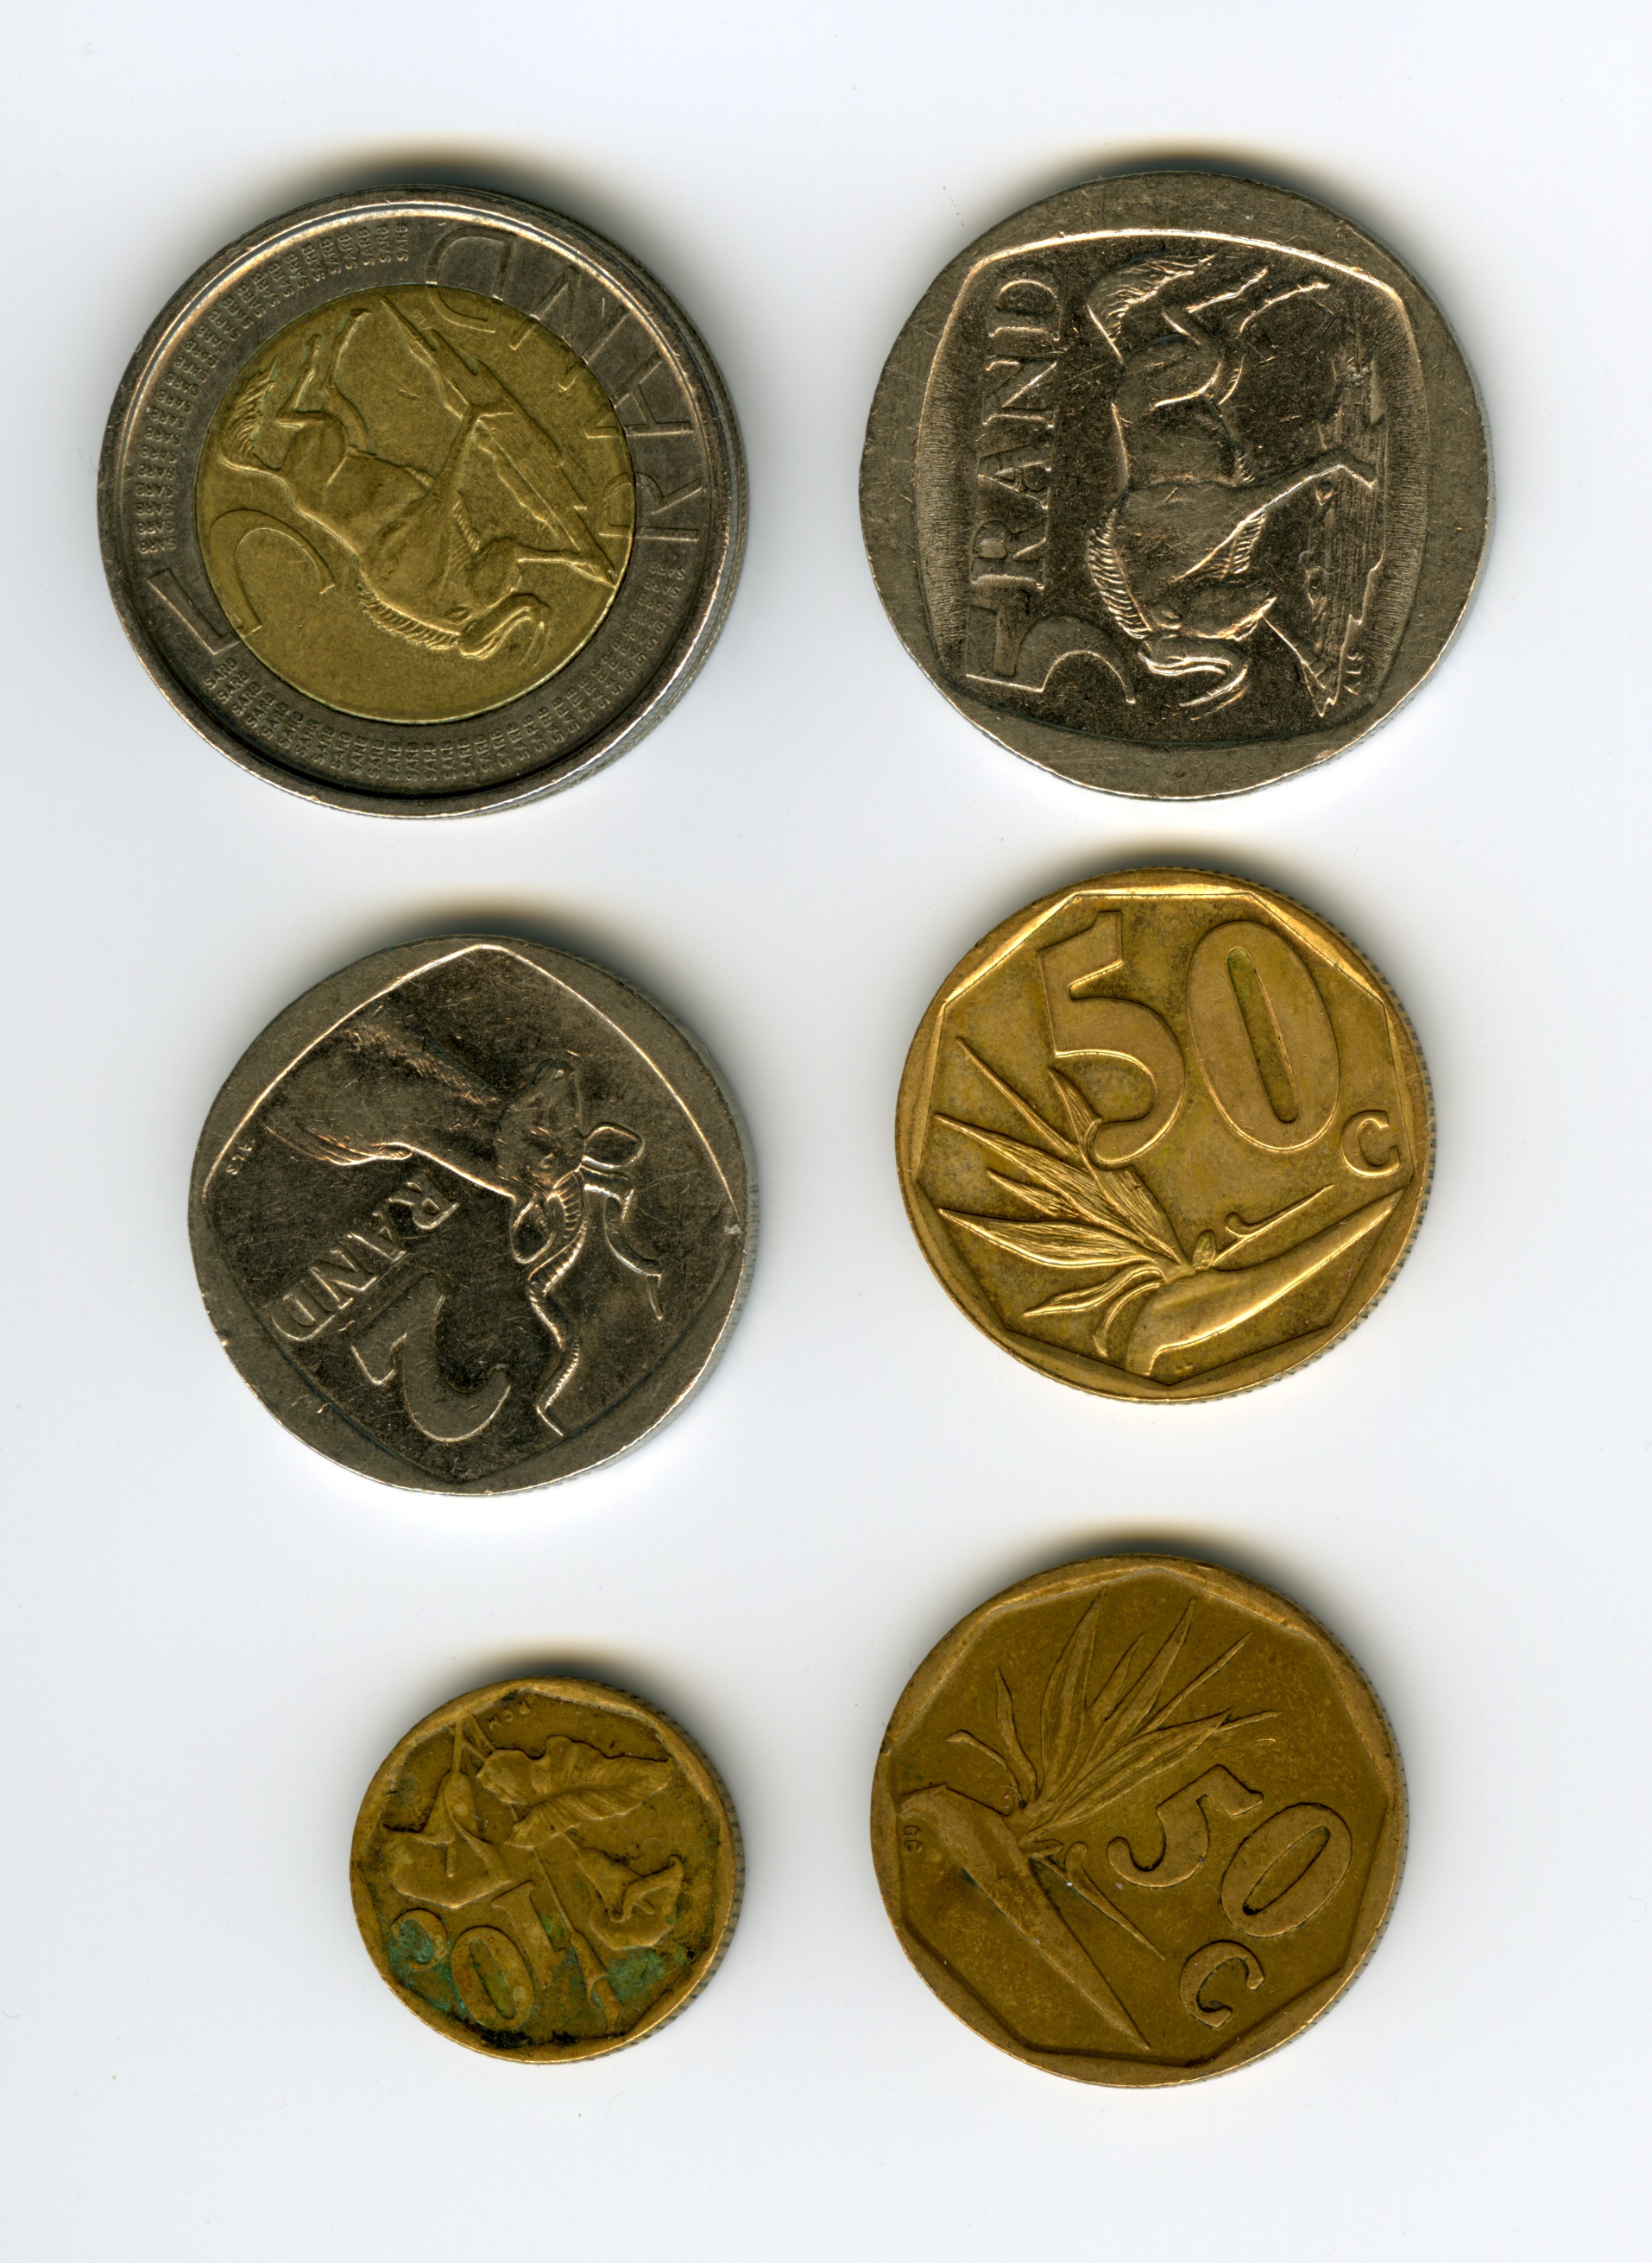 Money $$$: South-Africa-coins-various-values-ZAR-South-African-Rand ...